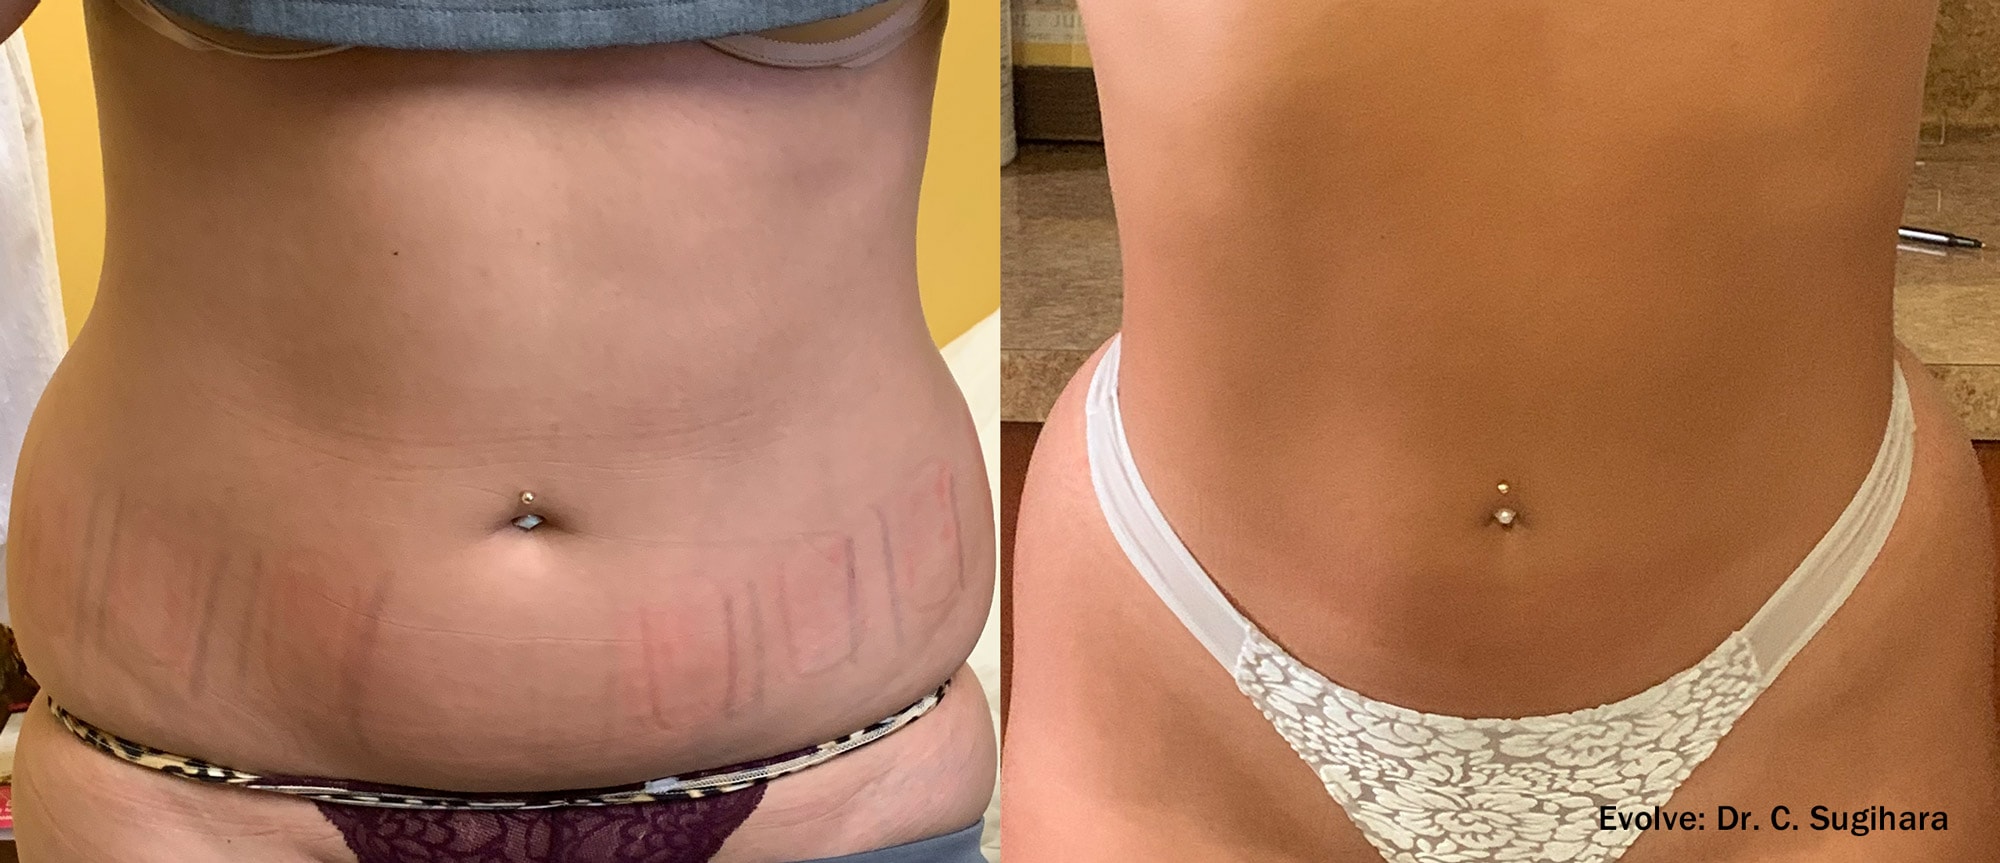 Before and After photos of Dr. Sugihara’s Evolve X treatments reducing fat and contouring a woman’s hips and waist